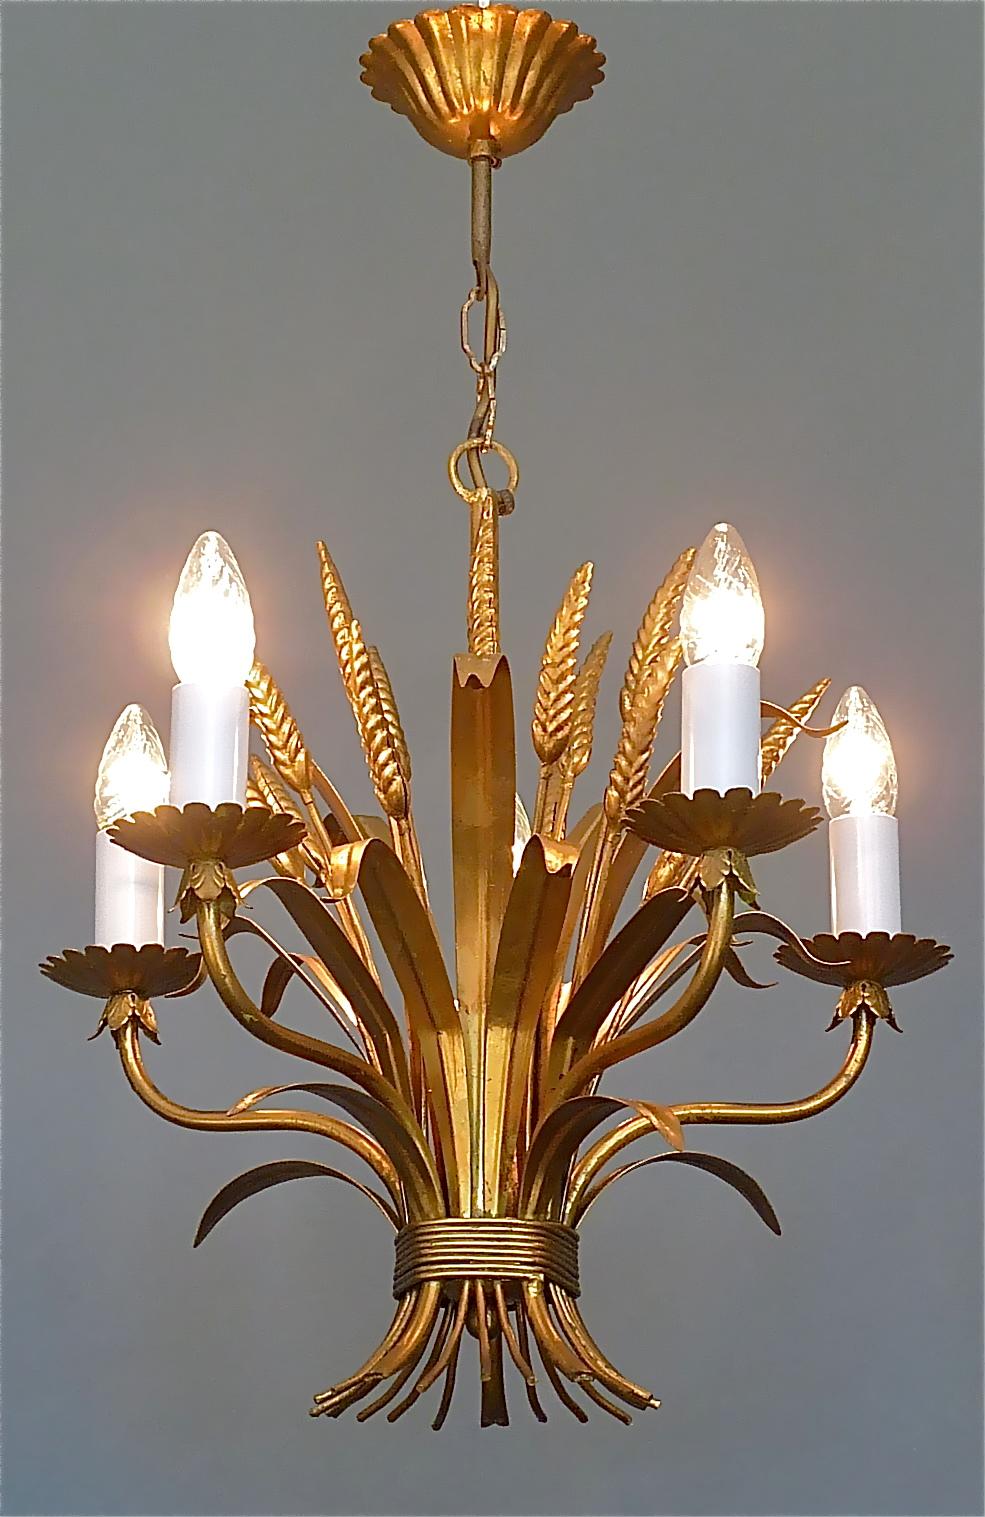 Gilt Italian Floral Sheaf of Wheat Five-Light Chandelier Coco Chanel Style, Kögl For Sale 8